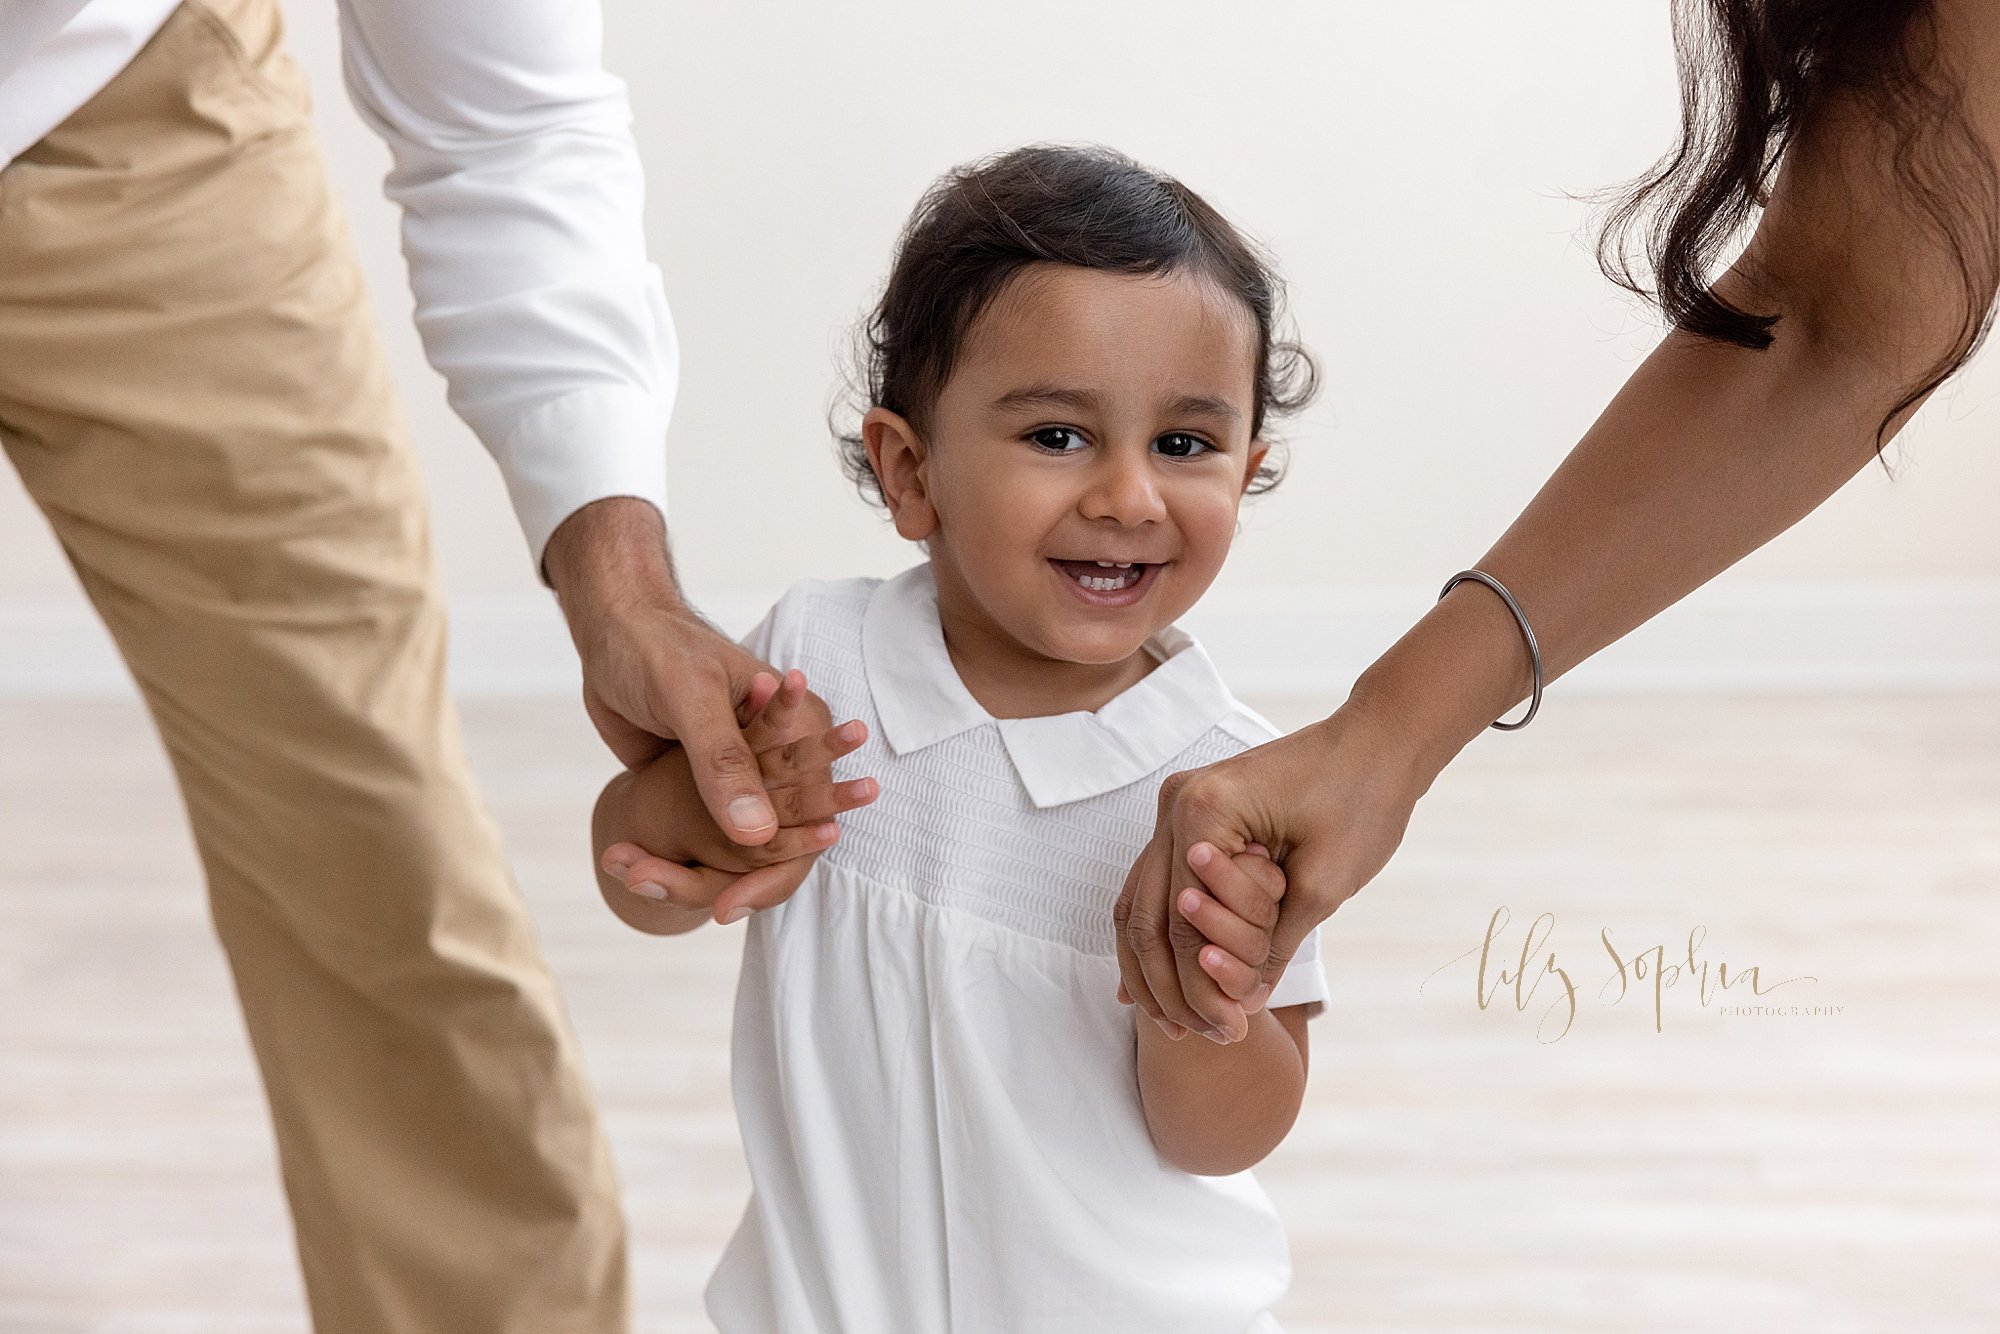  Family picture of a smiling Indian boy showing his tiny teeth as he runs holding his mom and dad’s hands in a photography studio near Virginia Highlands in Atlanta that uses natural light. 